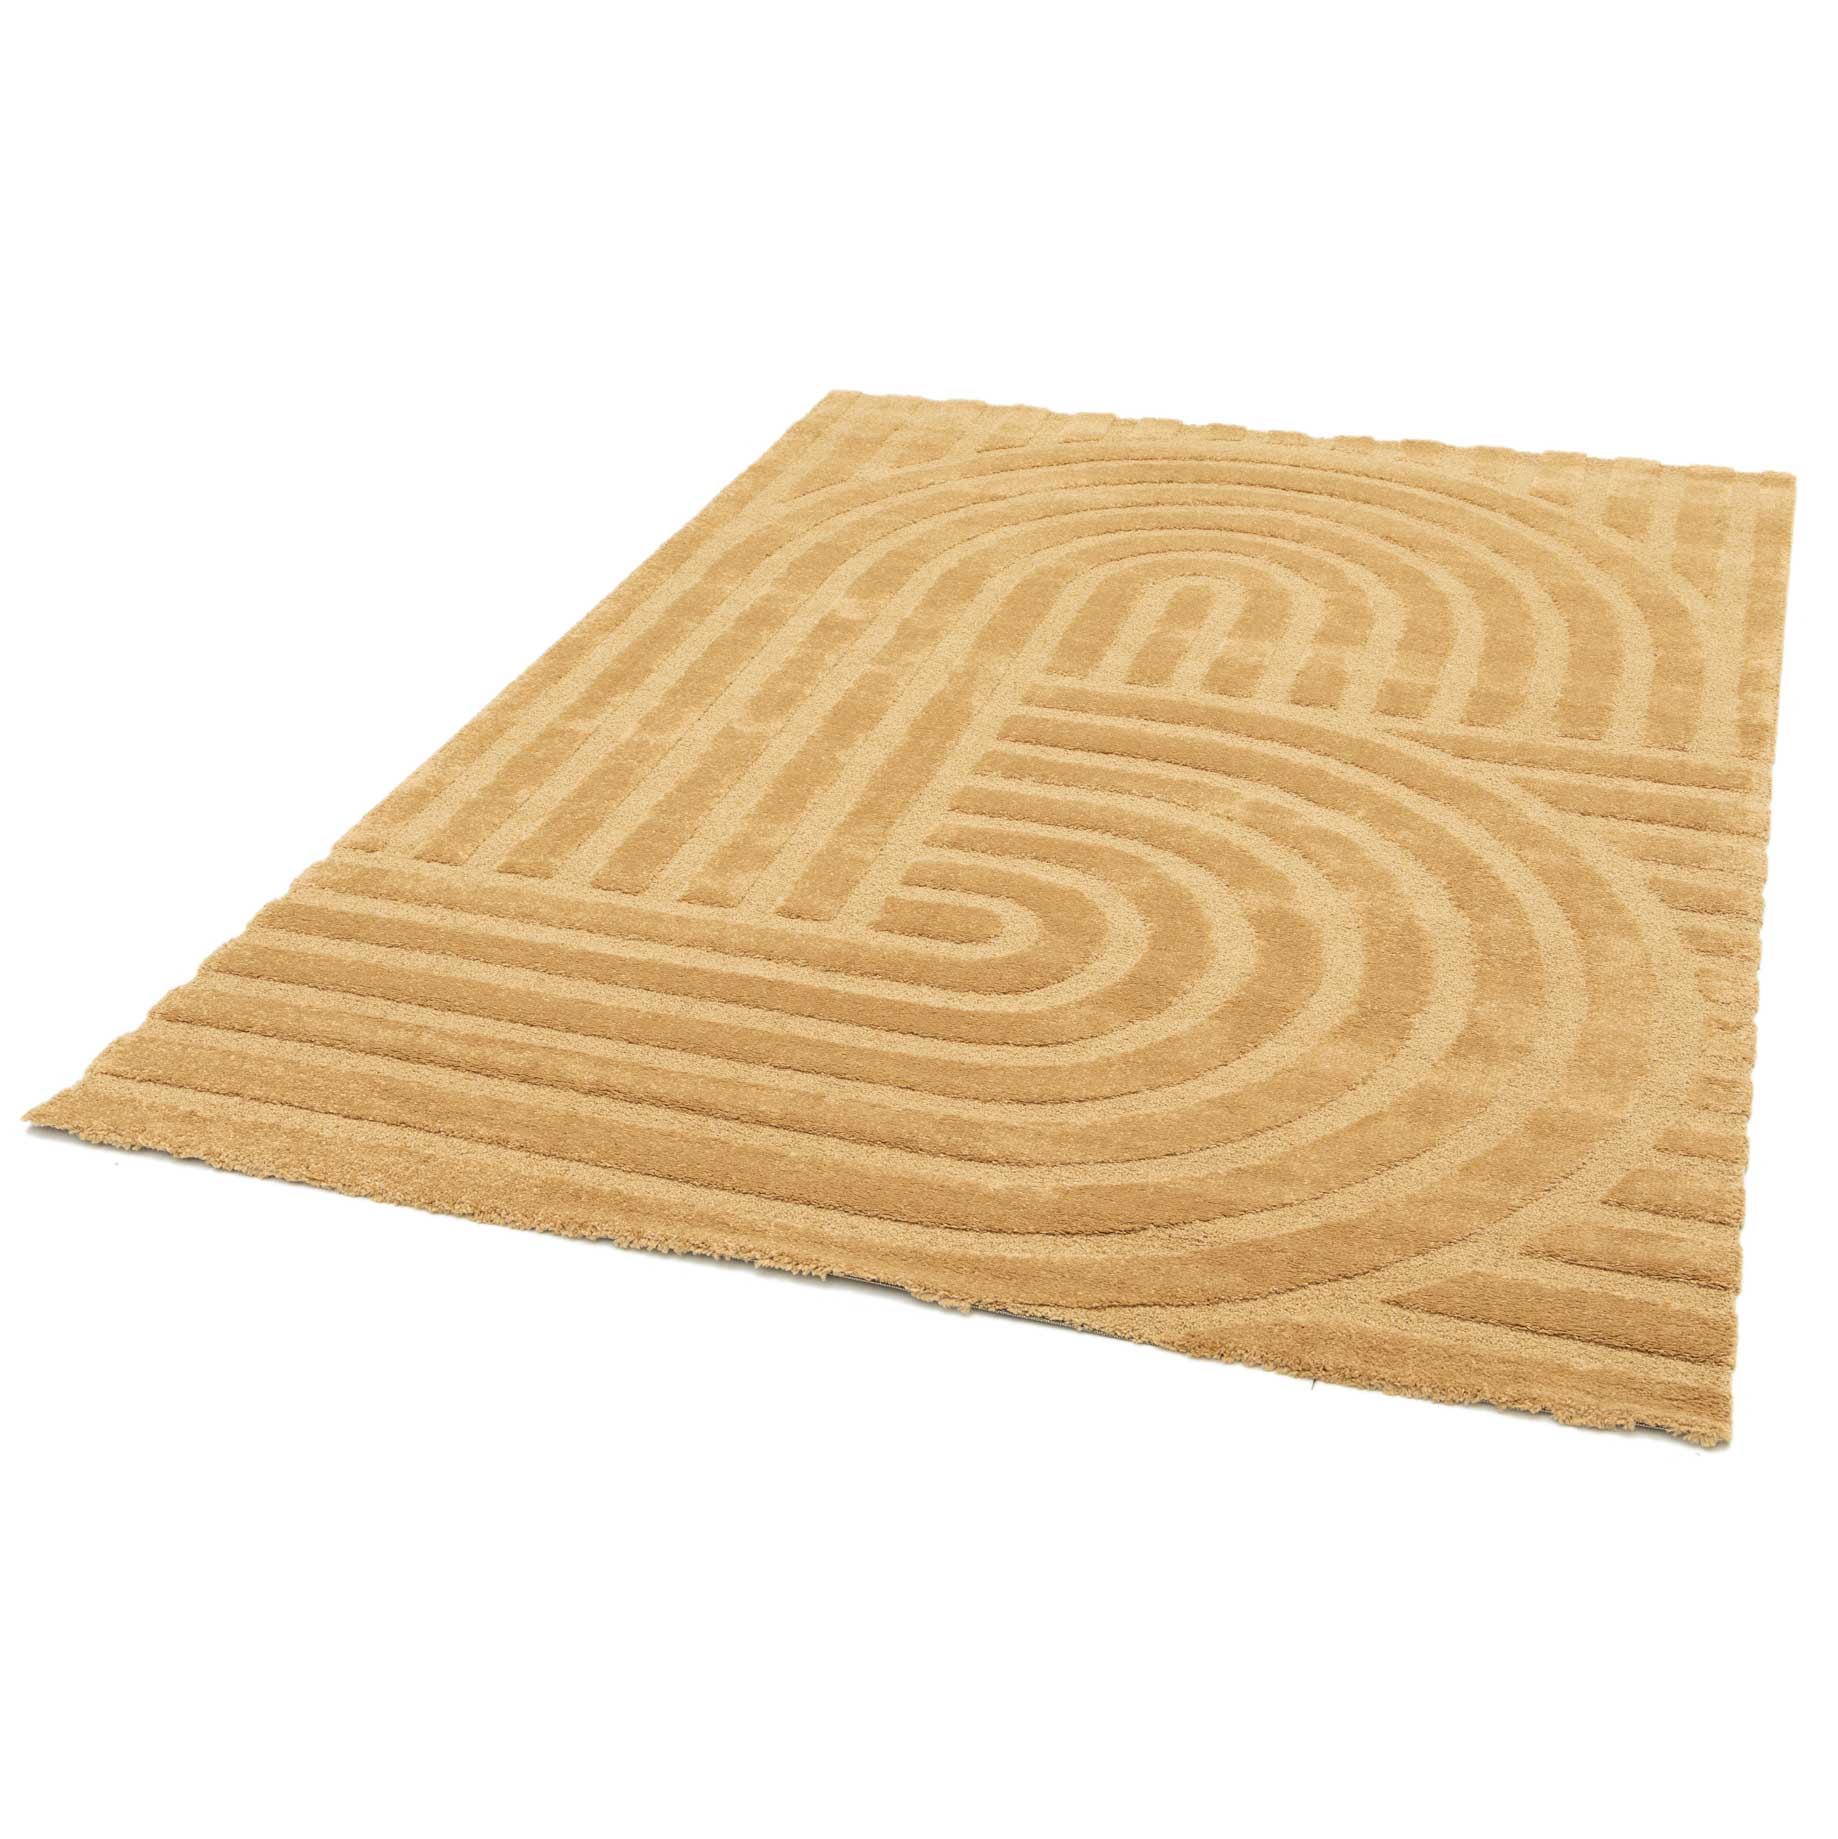 Geometric rug with relief Snowy 59773